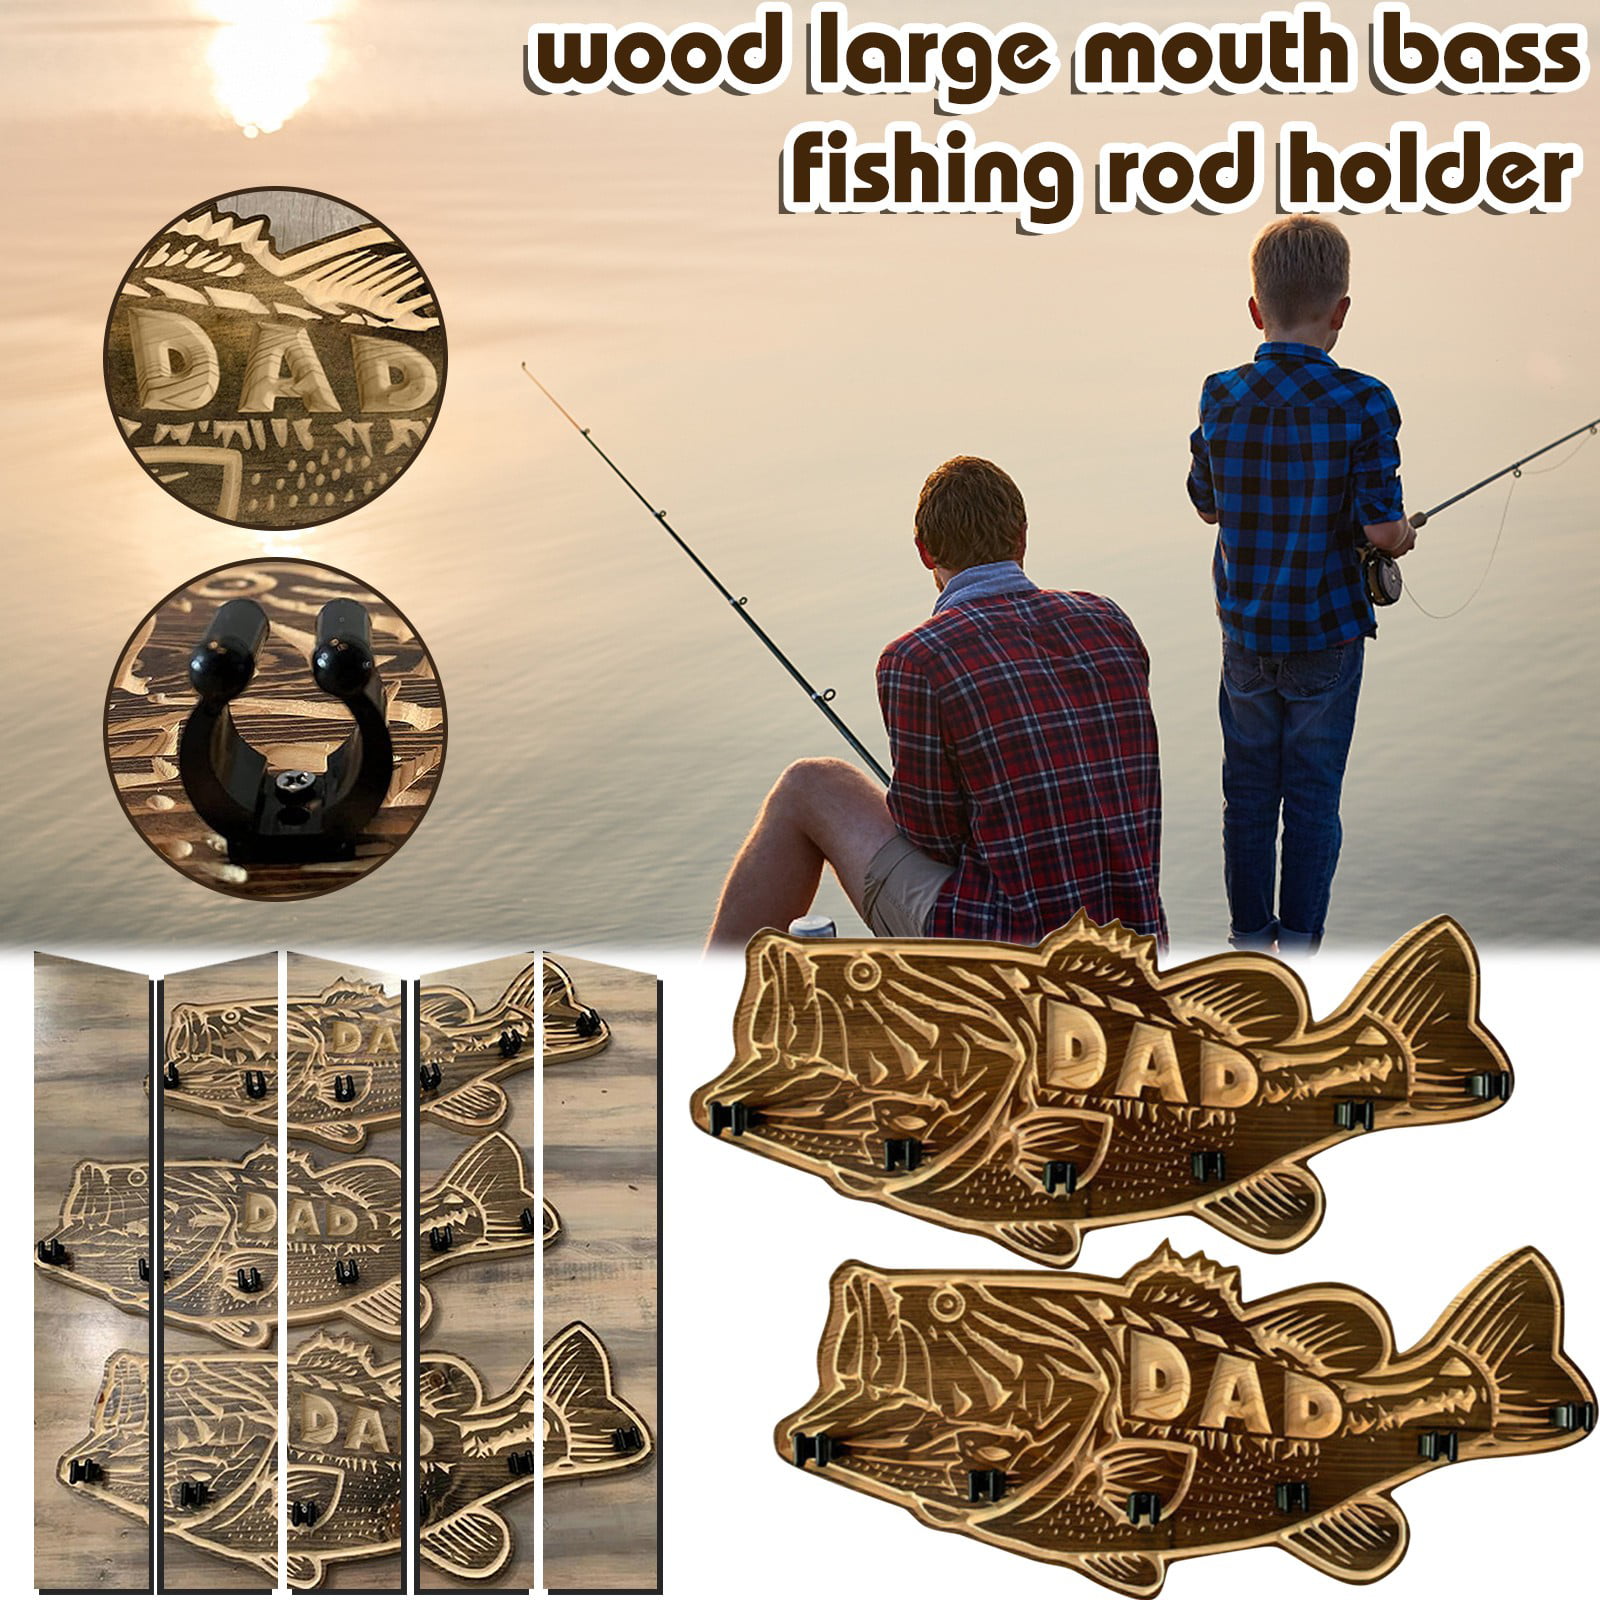 Judty Wooden Fishing Rod Bass Can Hold Wall-mounted Fish Largemouth Rods  Fishing 6 Home Decor 